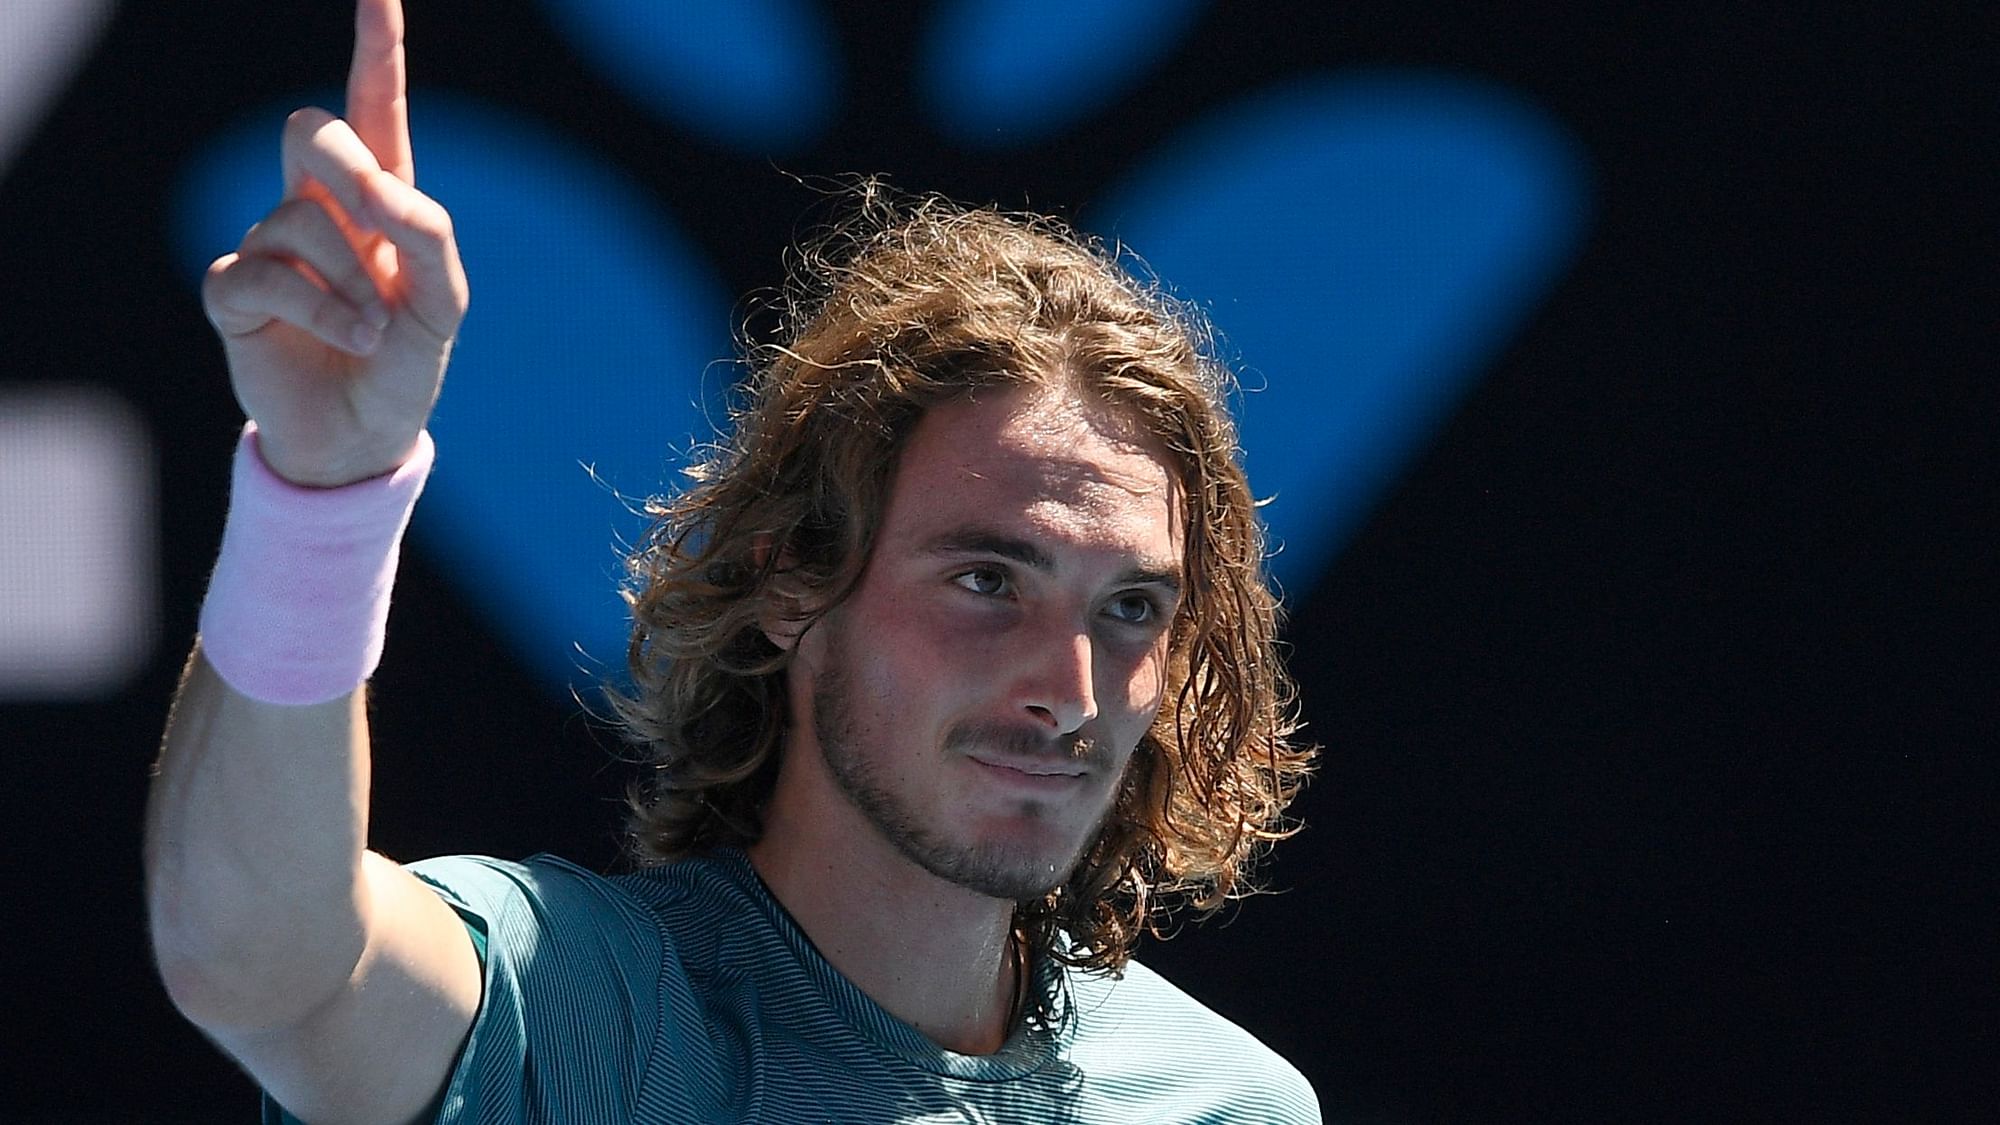 Greece’s Stefanos Tsitsipas celebrates after defeating Spain’s Roberto Bautista Agut in their quarterfinal match at the Australian Open tennis championships in Melbourne, Australia, Tuesday, Jan. 22, 2019.